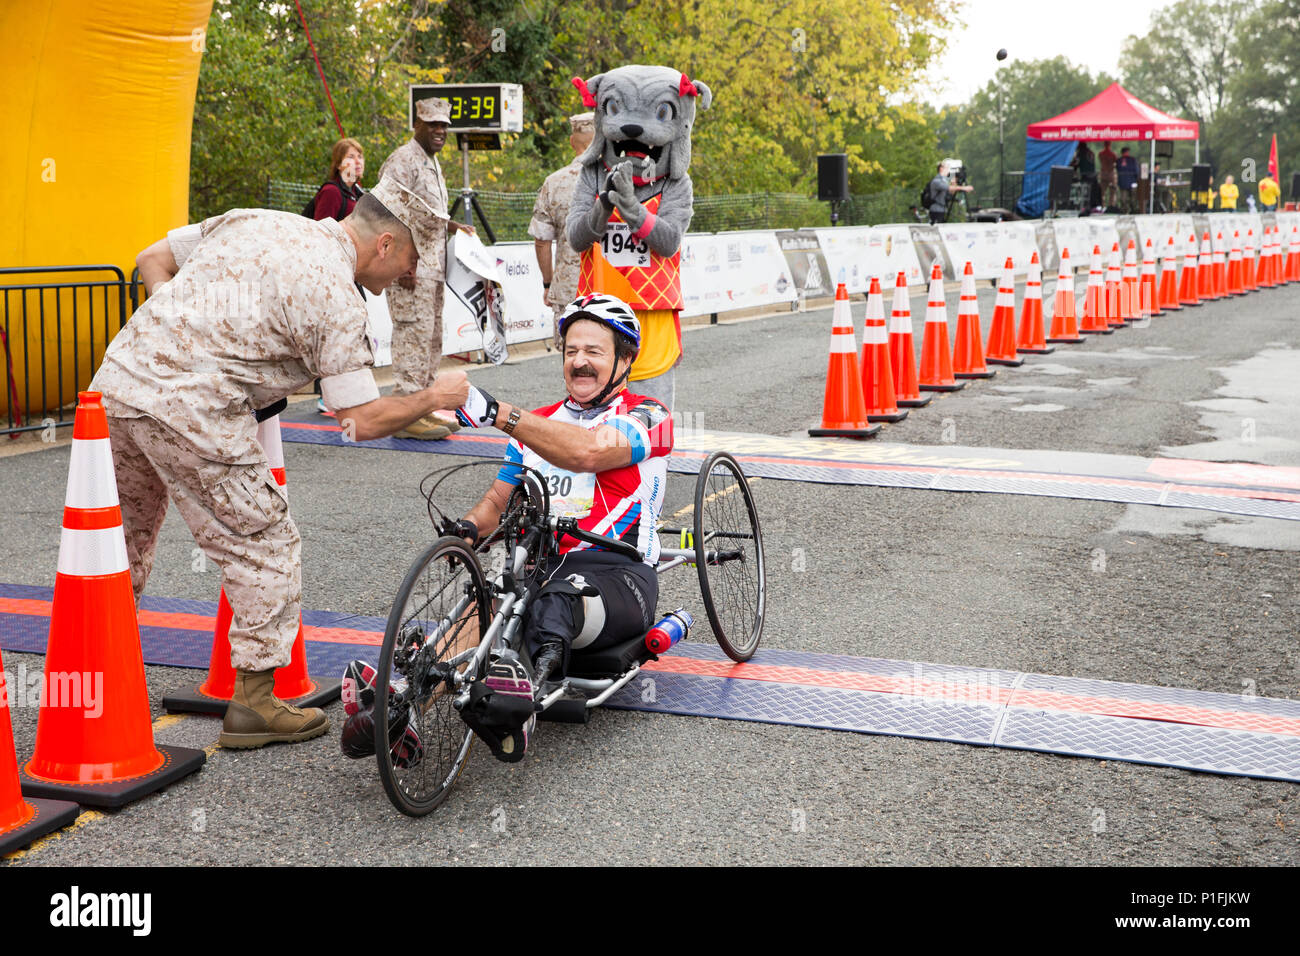 U.S Marine Corps Col. Joseph M. Murray, commander of Marine Corps Base Quantico, fist bumps Rick Weisbrod, New York, NY, handcrank participant of the 41st Marine Corps Marathon, at the finish line near the Marine Corps War Memorial in Arlington, Va., Oct. 30, 2016. Also known as 'The People's Marathon,' the 26.2 mile race drew roughly 30,000 participants to promote physical fitness, generate goodwill in the community, and showcase the organizational skills of the Marine Corps. (U.S. Marine Corps photo by Staff Sgt. Sarah R. Hickory) Stock Photo